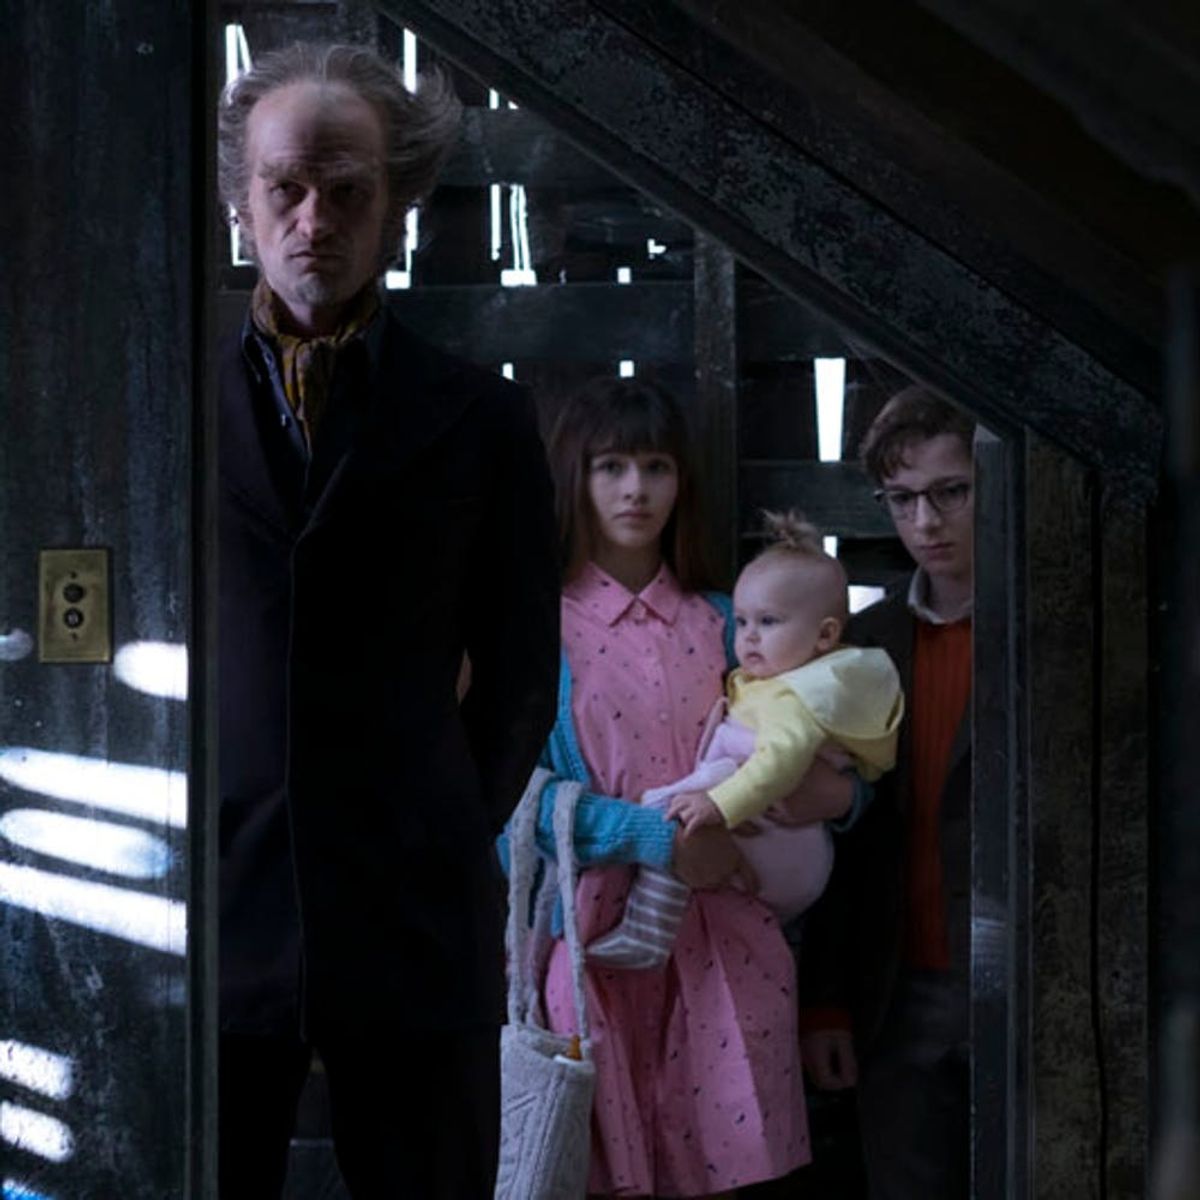 New Series of Unfortunate Events Trailer Reveals Misfortune, Despair and Creepy Awesomeness